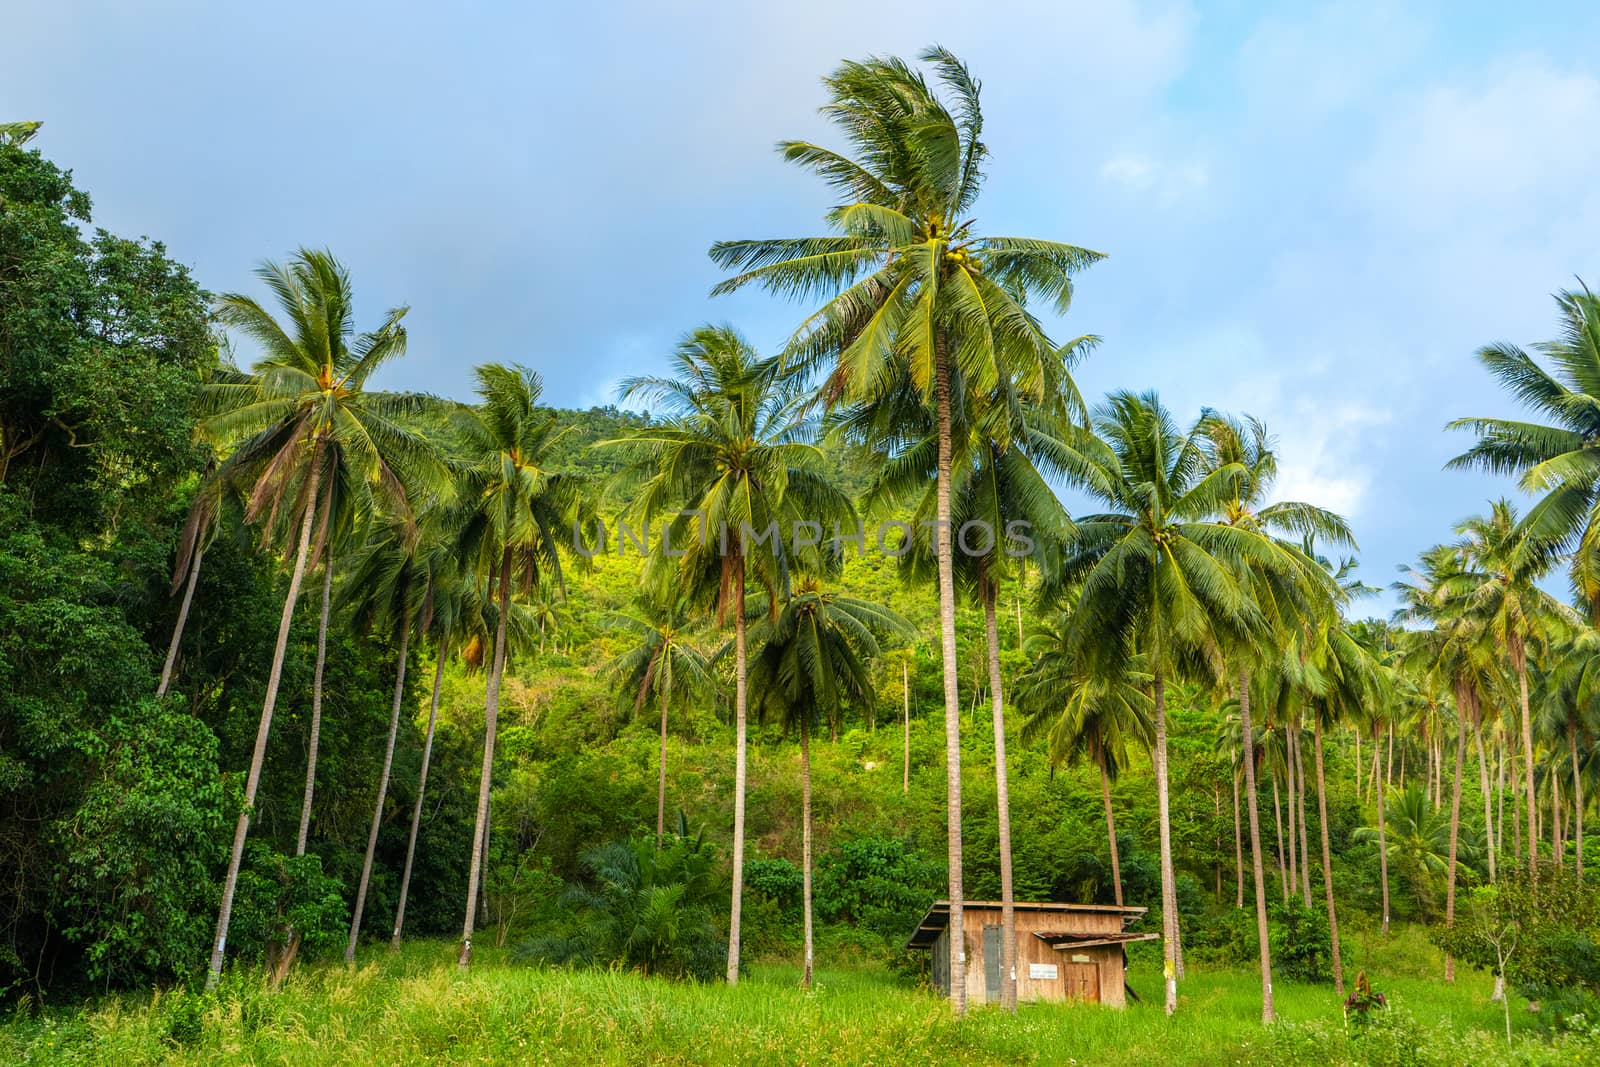 A hut between palm trees in the jungle.